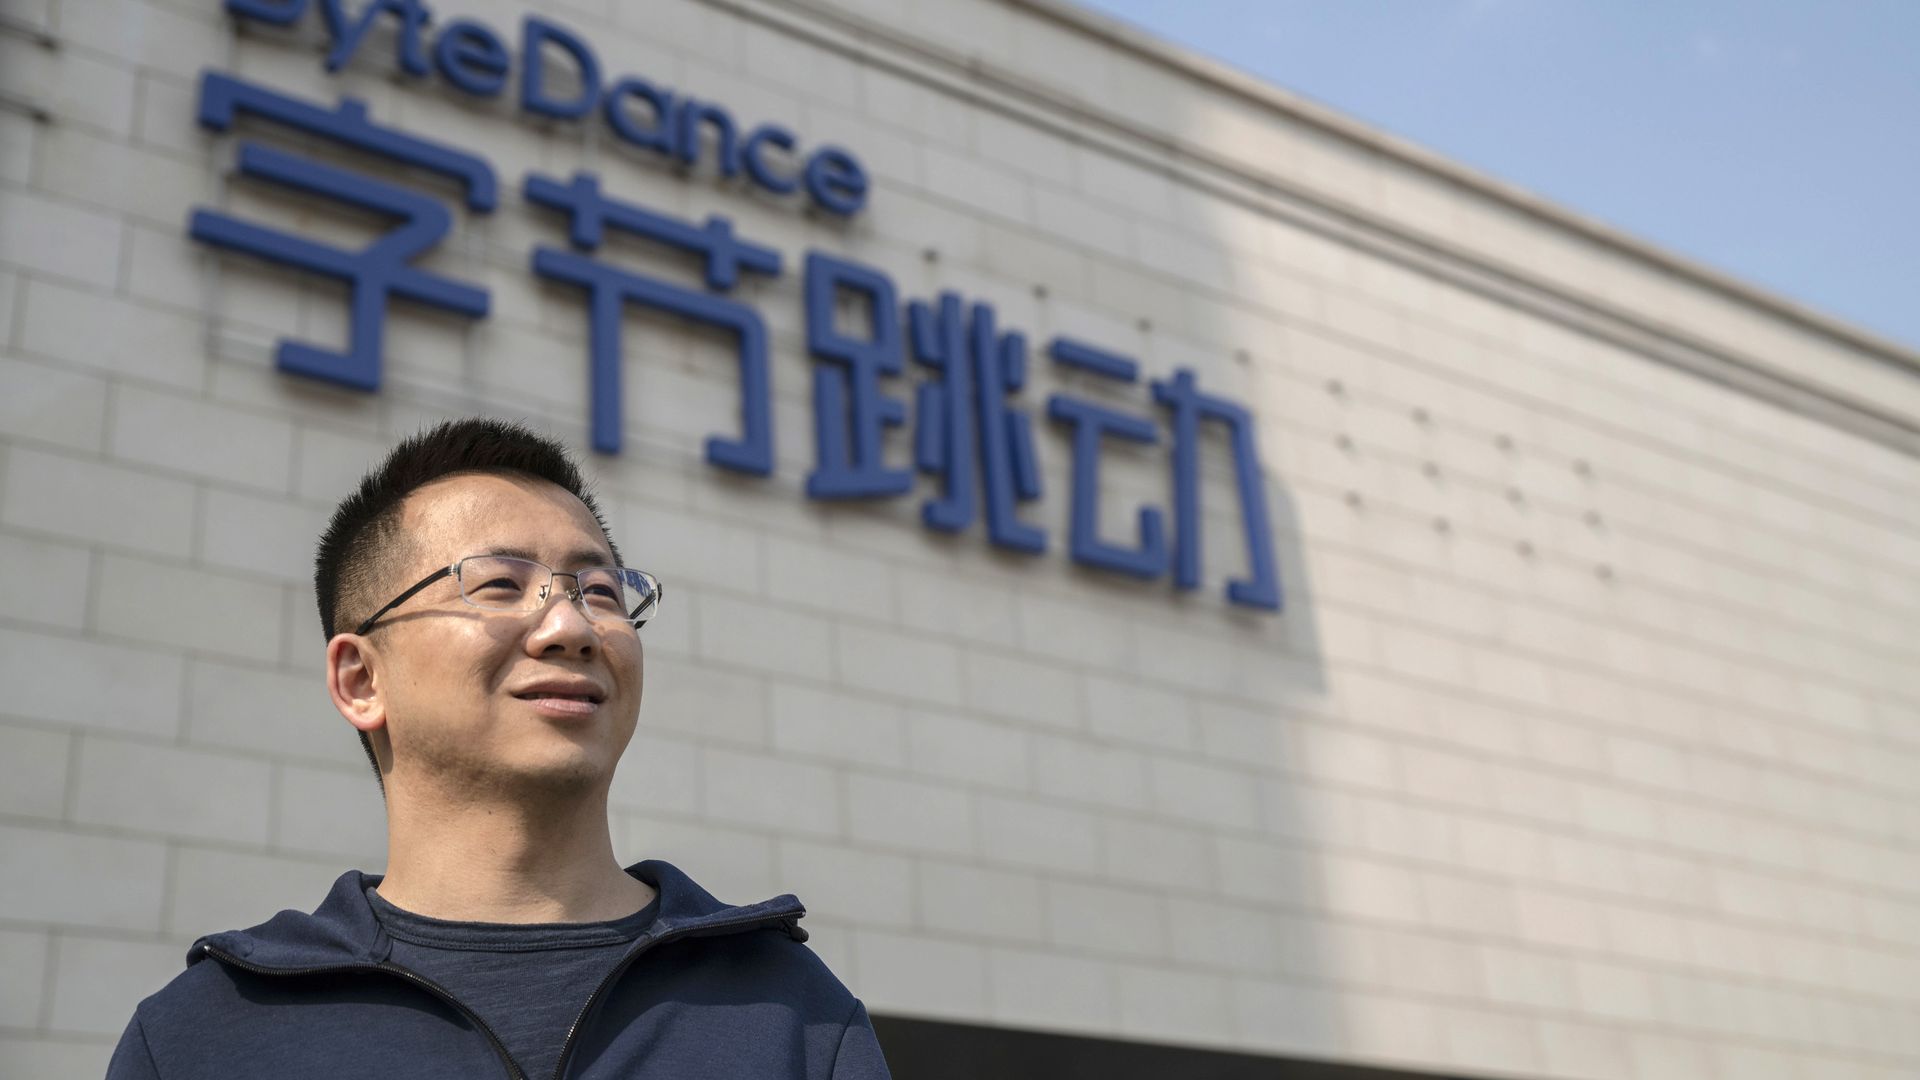 Zhang Yiming, chief executive officer and founder of Bytedance Ltd., poses for a photograph in Beijing, China, on Thursday, April 11, 2019. 